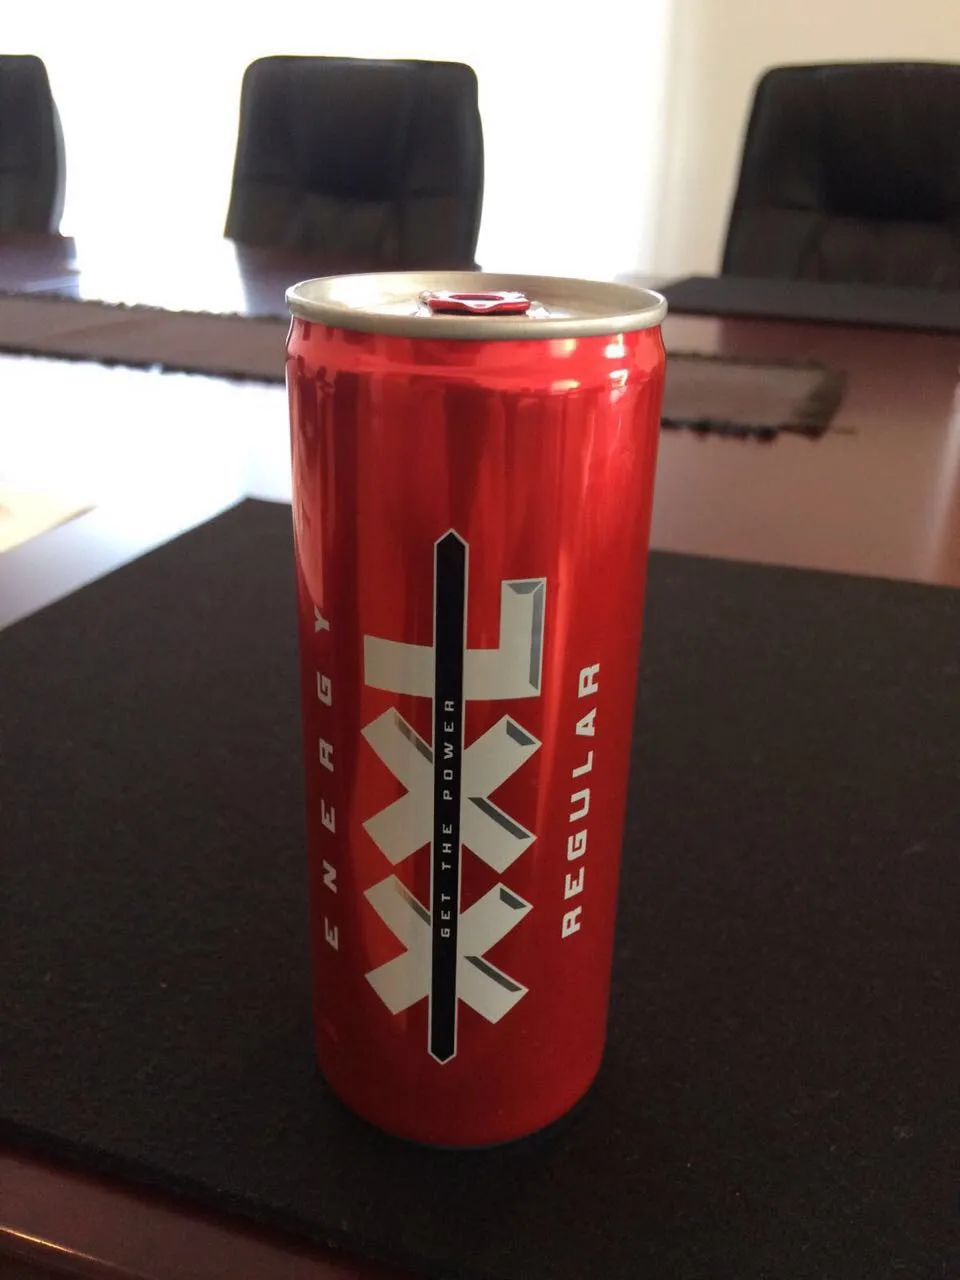 Xxl Energy Drink Made In Germany Stocklot Buy Rockstar Energy Drink Energy Drink Energy Drink